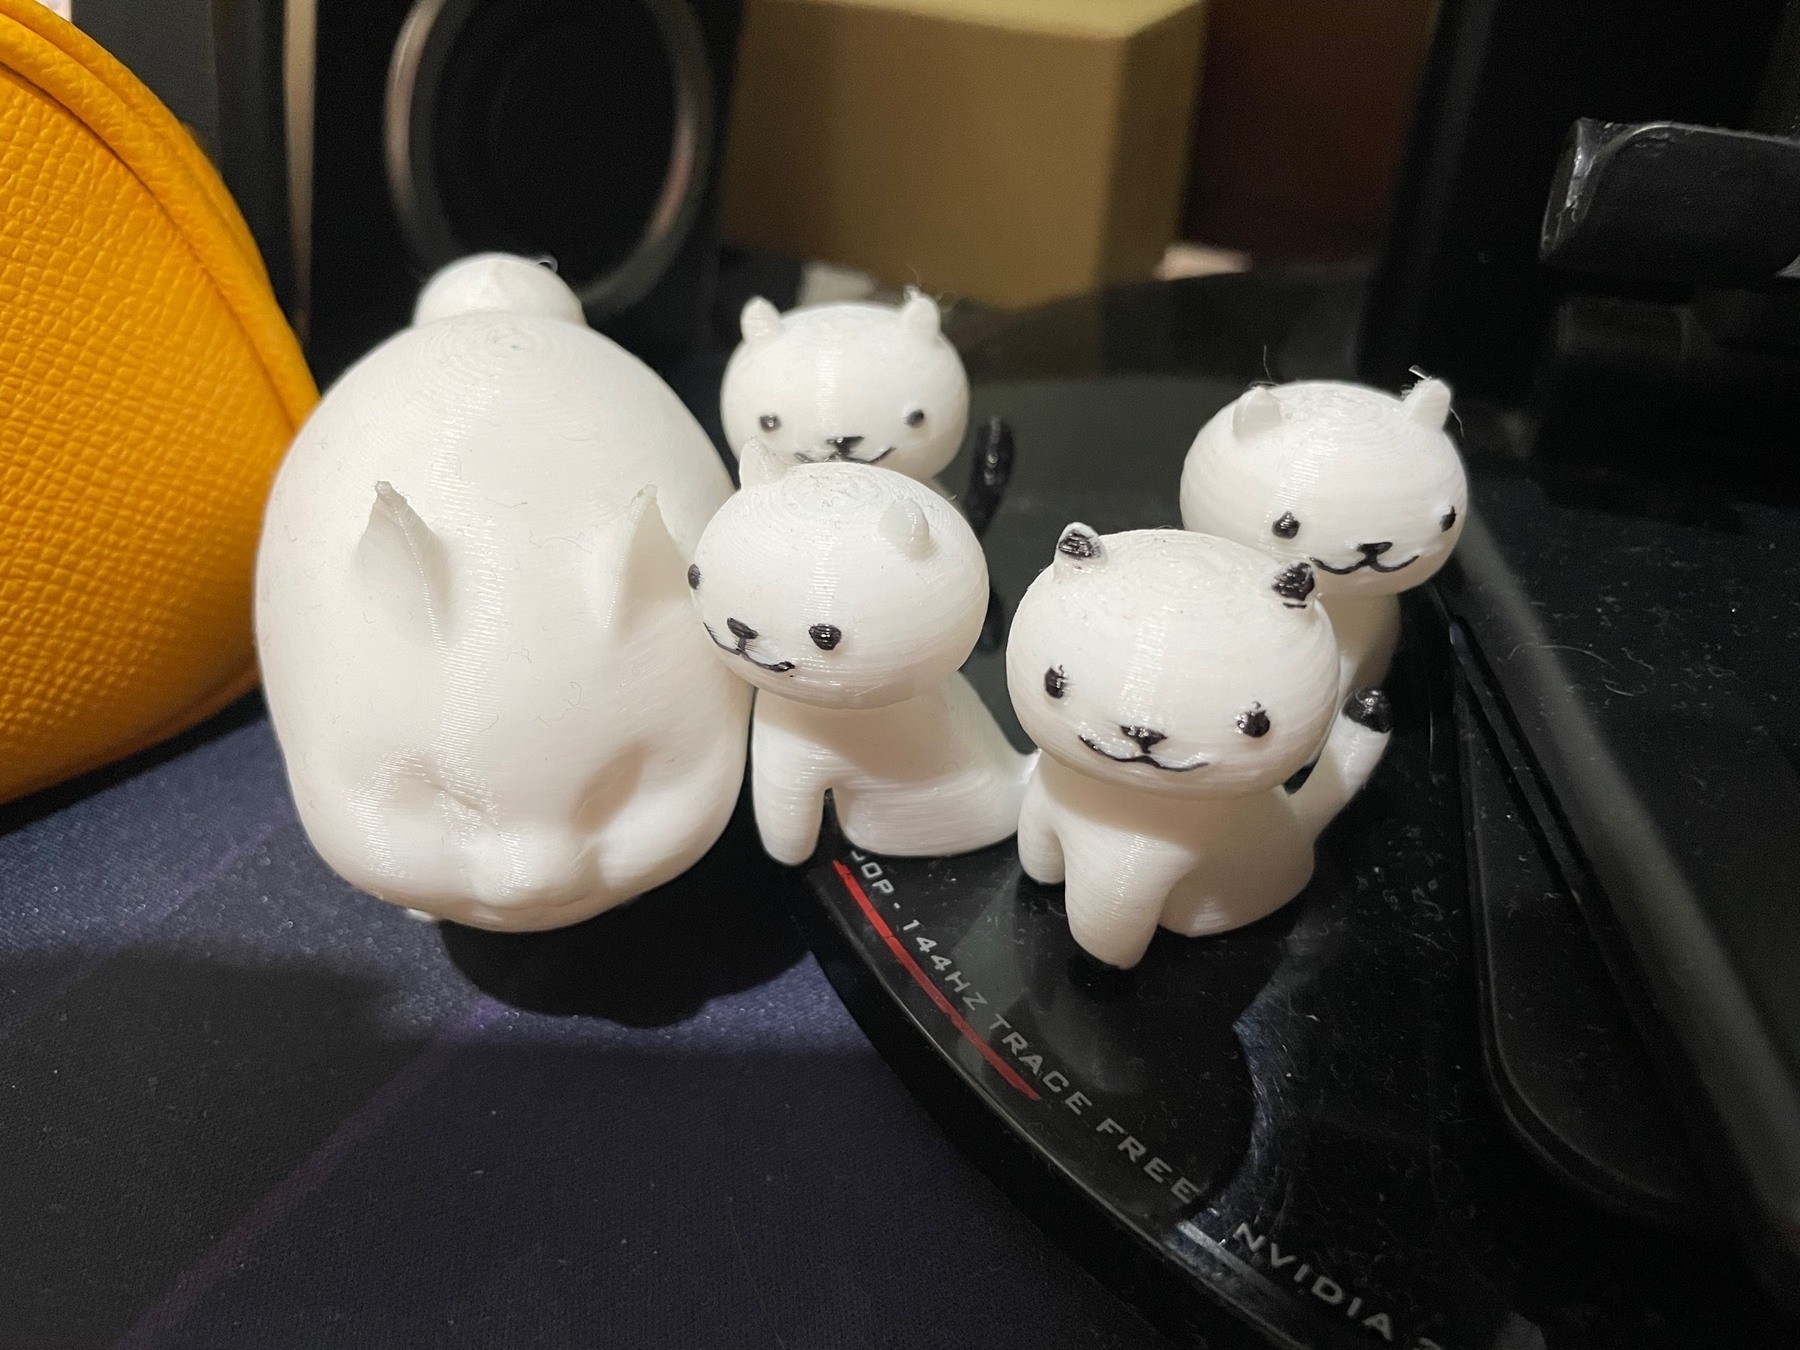 Chi's 3d-printed cats, given to her by her boyfriend. She has one big fat cat, which is based on the fat cat in FFXIV, and 4 smaller Neko Atsume style cats that have their eyes, nose, mouths, and some patterns colored in with a black marker.